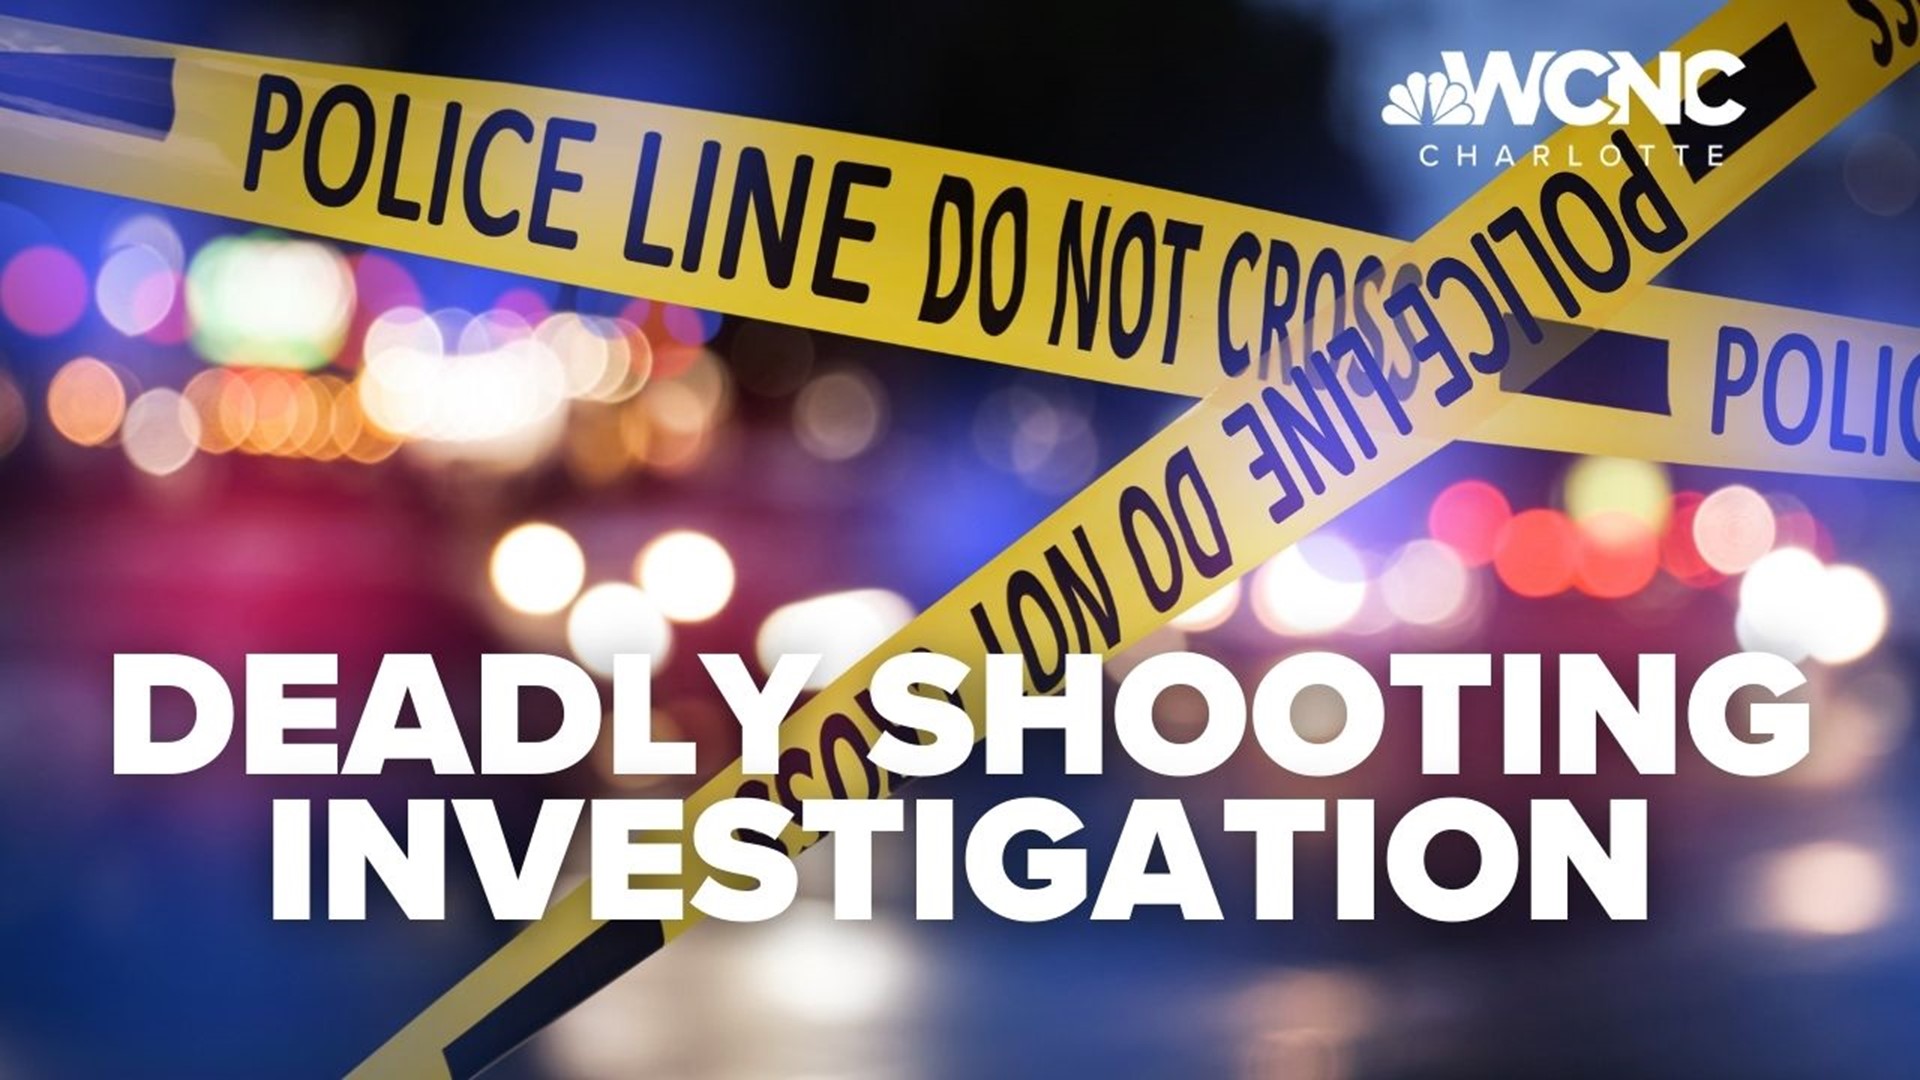 Police in Salisbury are investigating after a man was shot and killed at a home late Monday night.